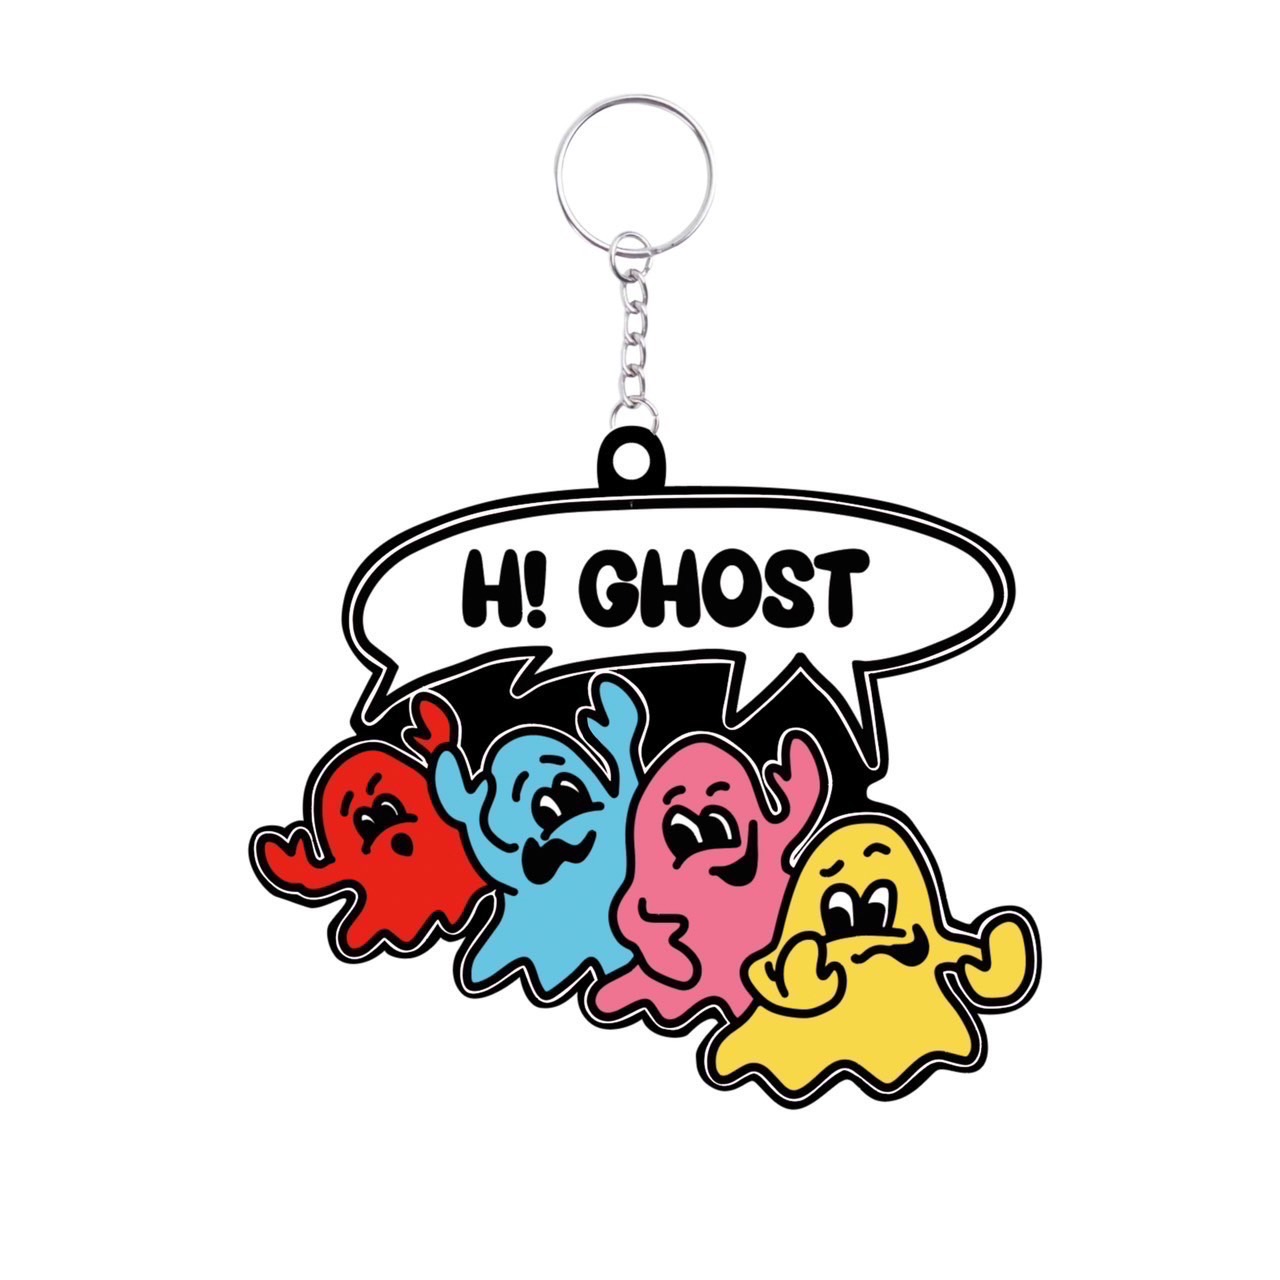 HI GHOST brothers KEY RING